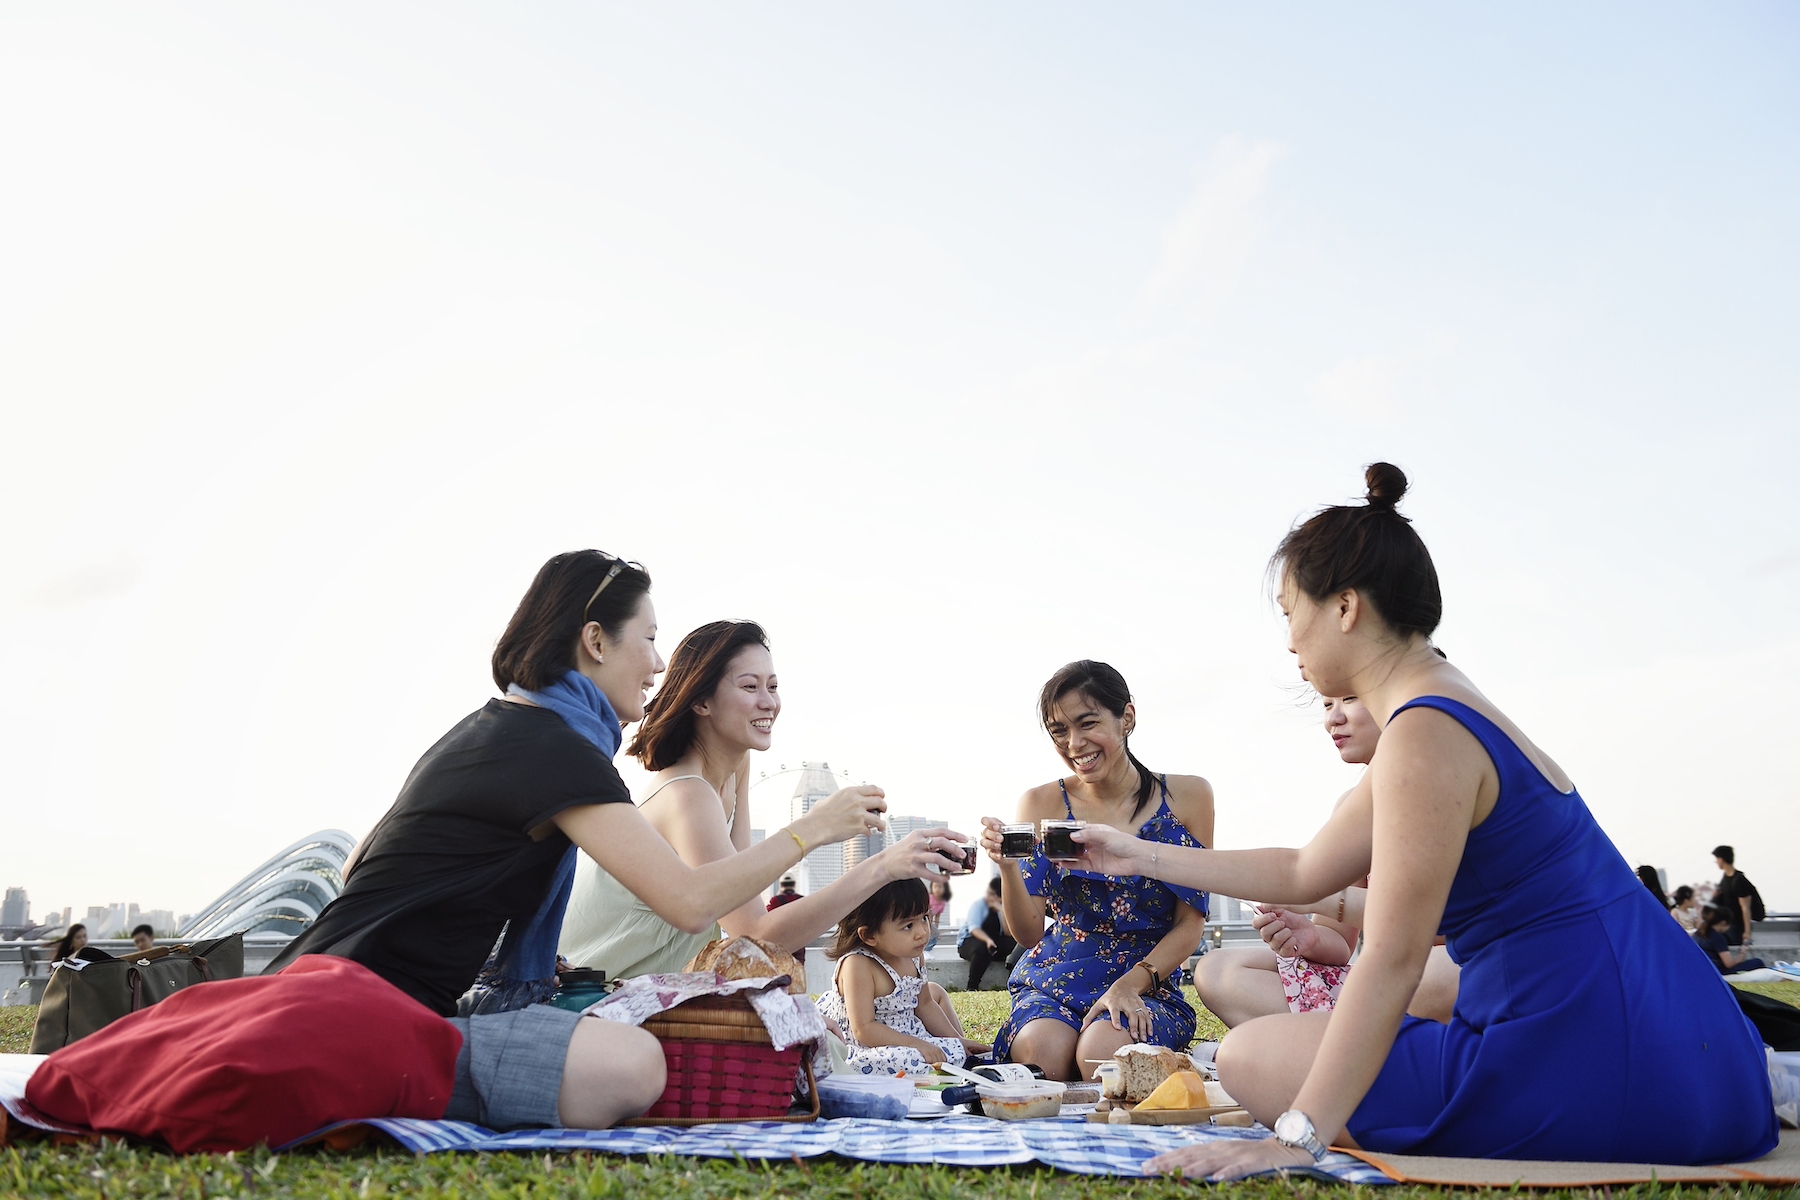 A group of friends meets for a picnic in the park on a summer day